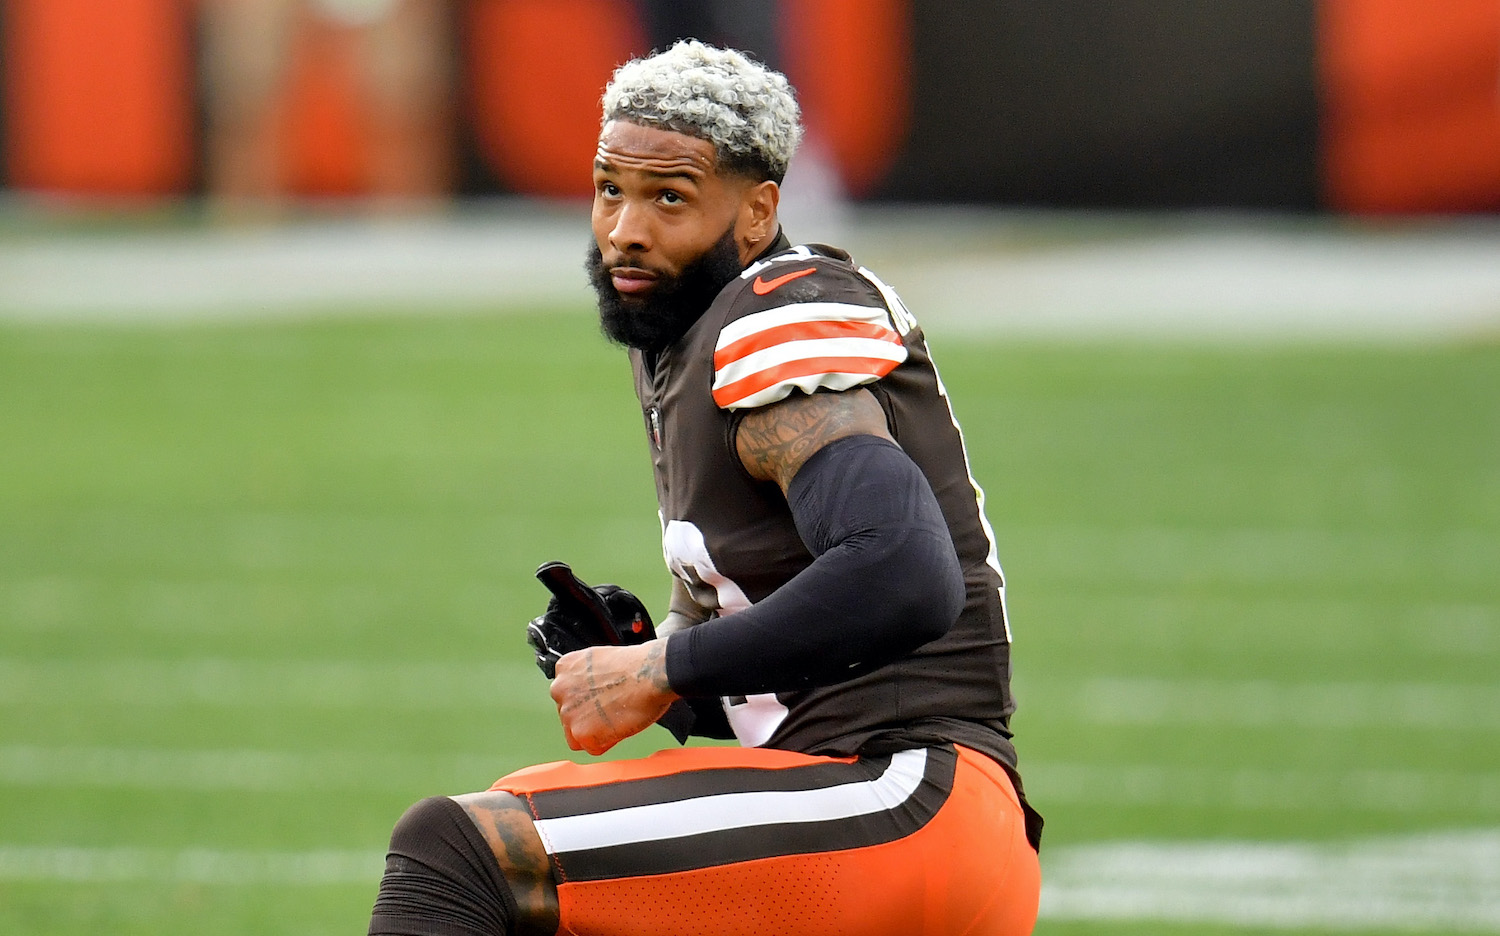 CLEVELAND, OHIO - OCTOBER 11: Odell Beckham Jr. #13 of the Cleveland Browns looks on in the second quarter against the Indianapolis Colts at FirstEnergy Stadium on October 11, 2020 in Cleveland, Ohio. (Photo by Jason Miller/Getty Images)